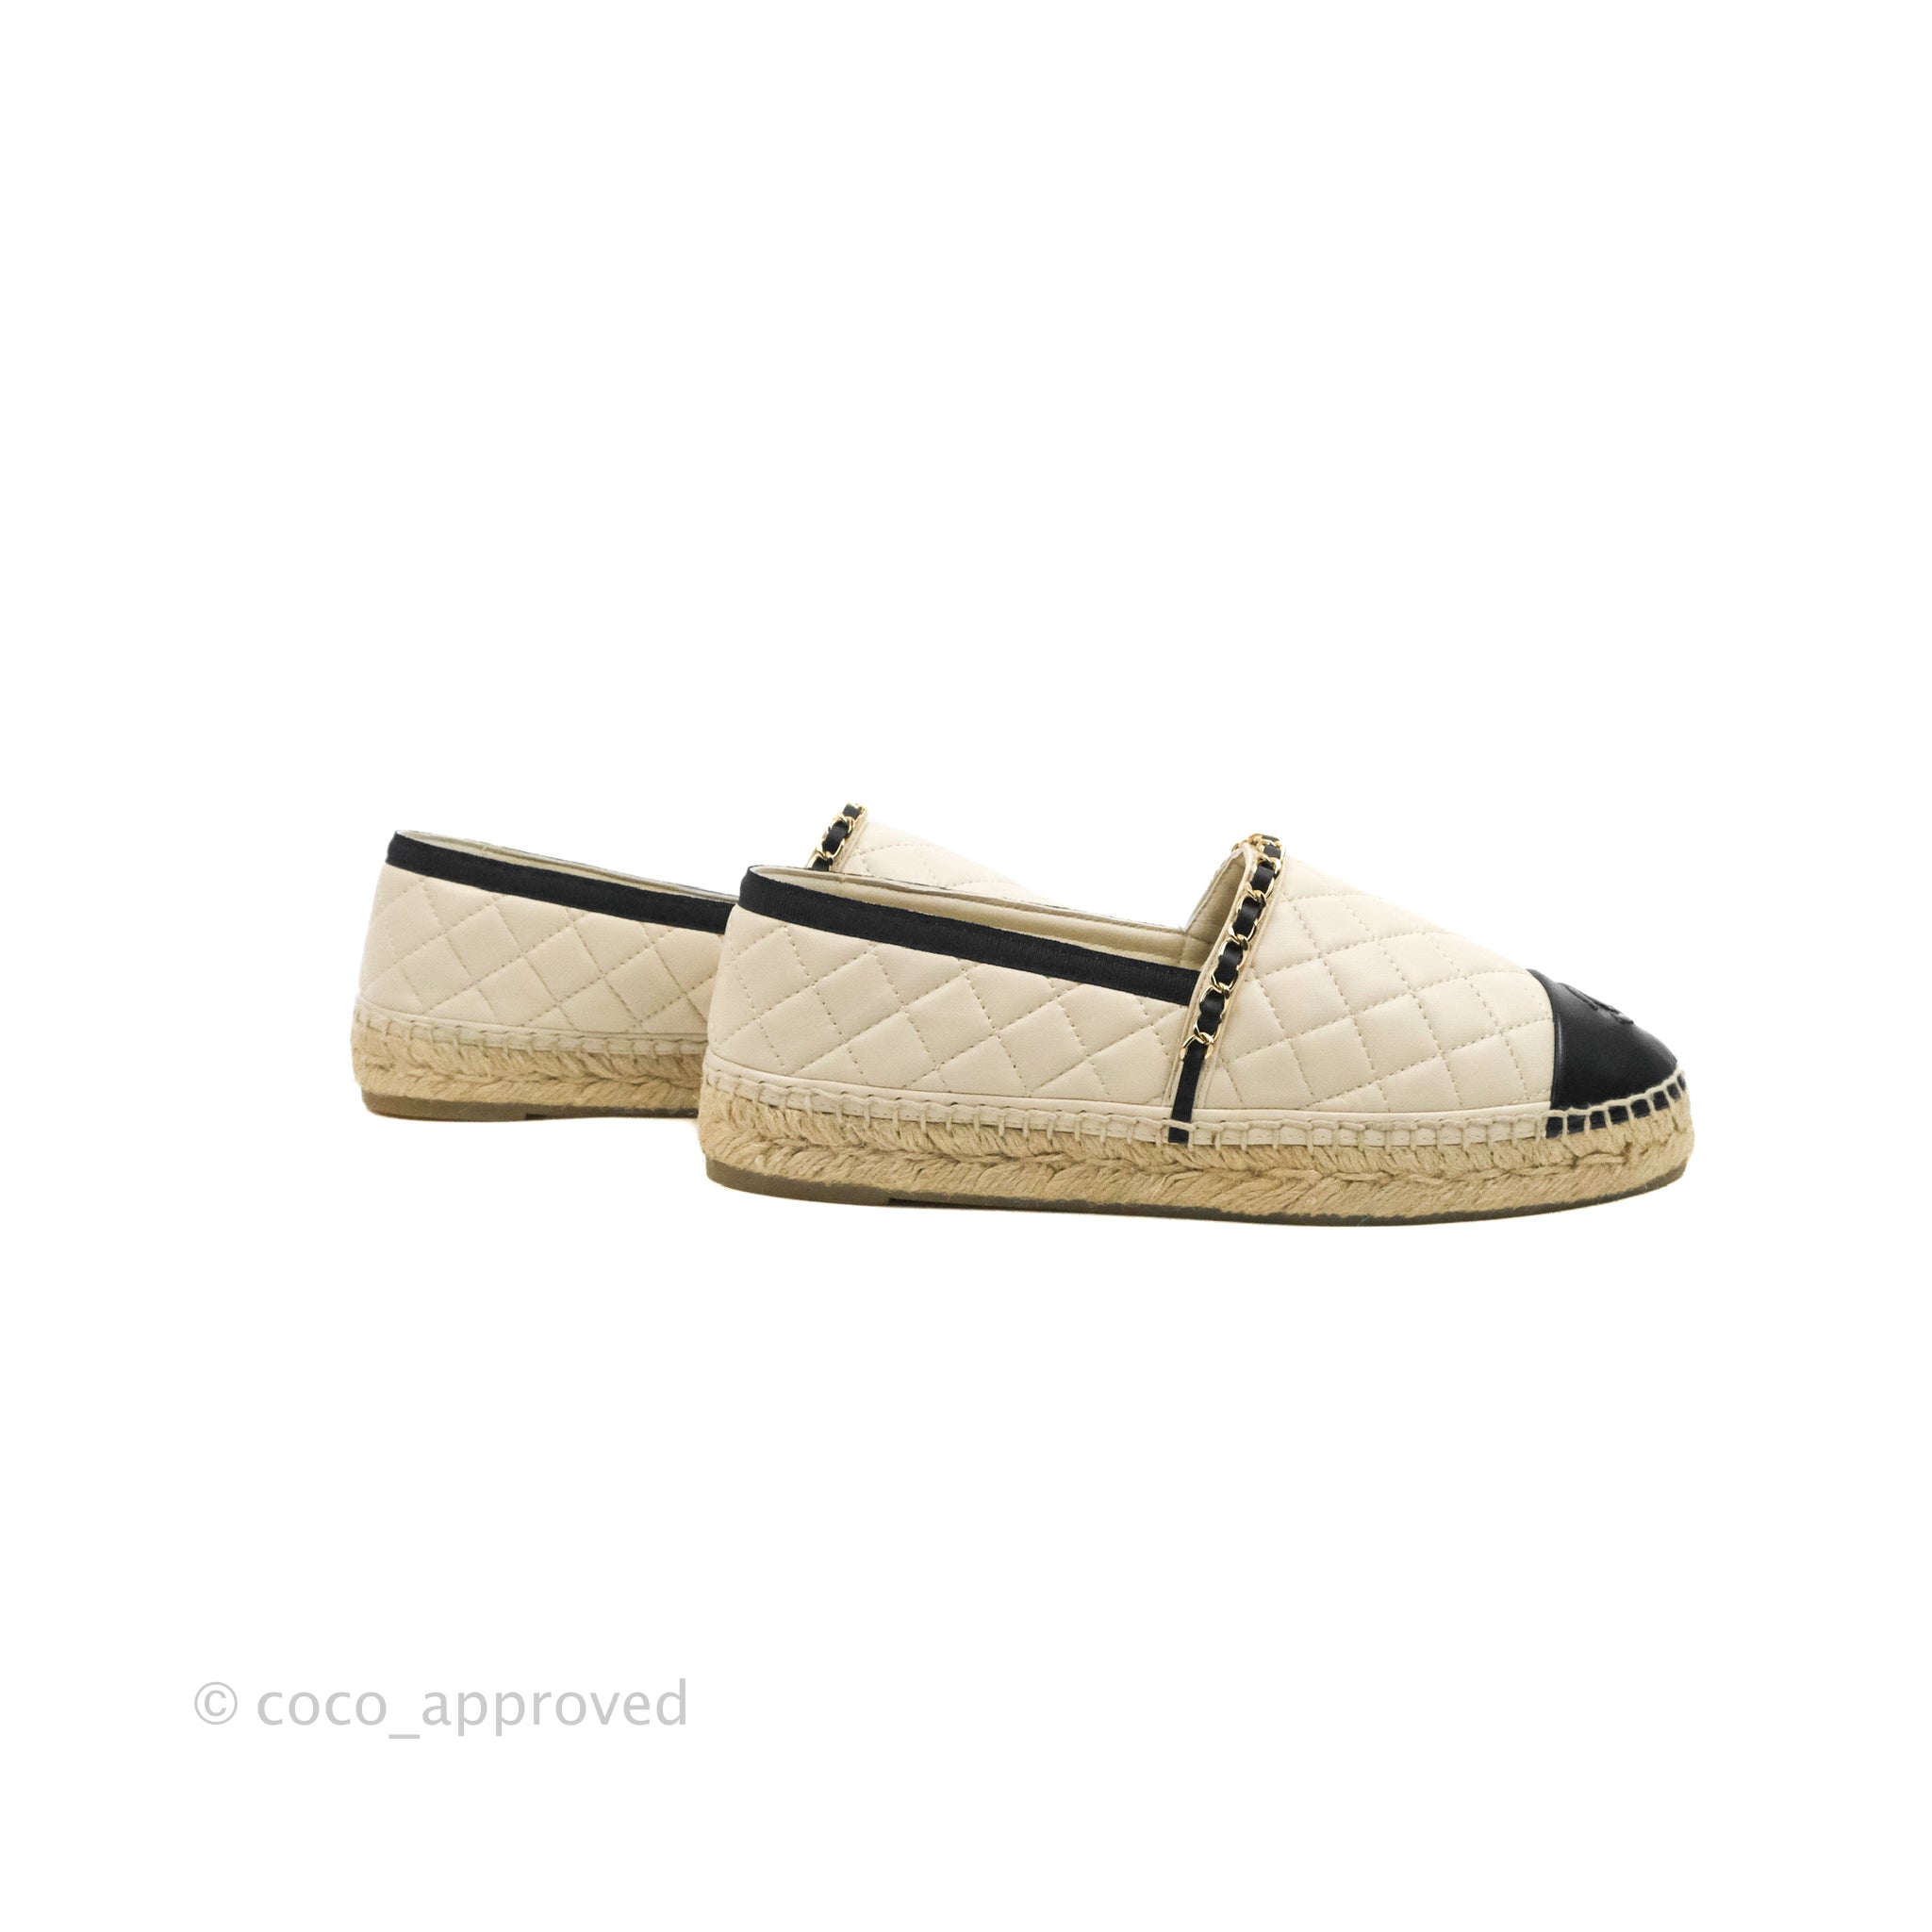 CHANEL, Shoes, Chanel Espadrille